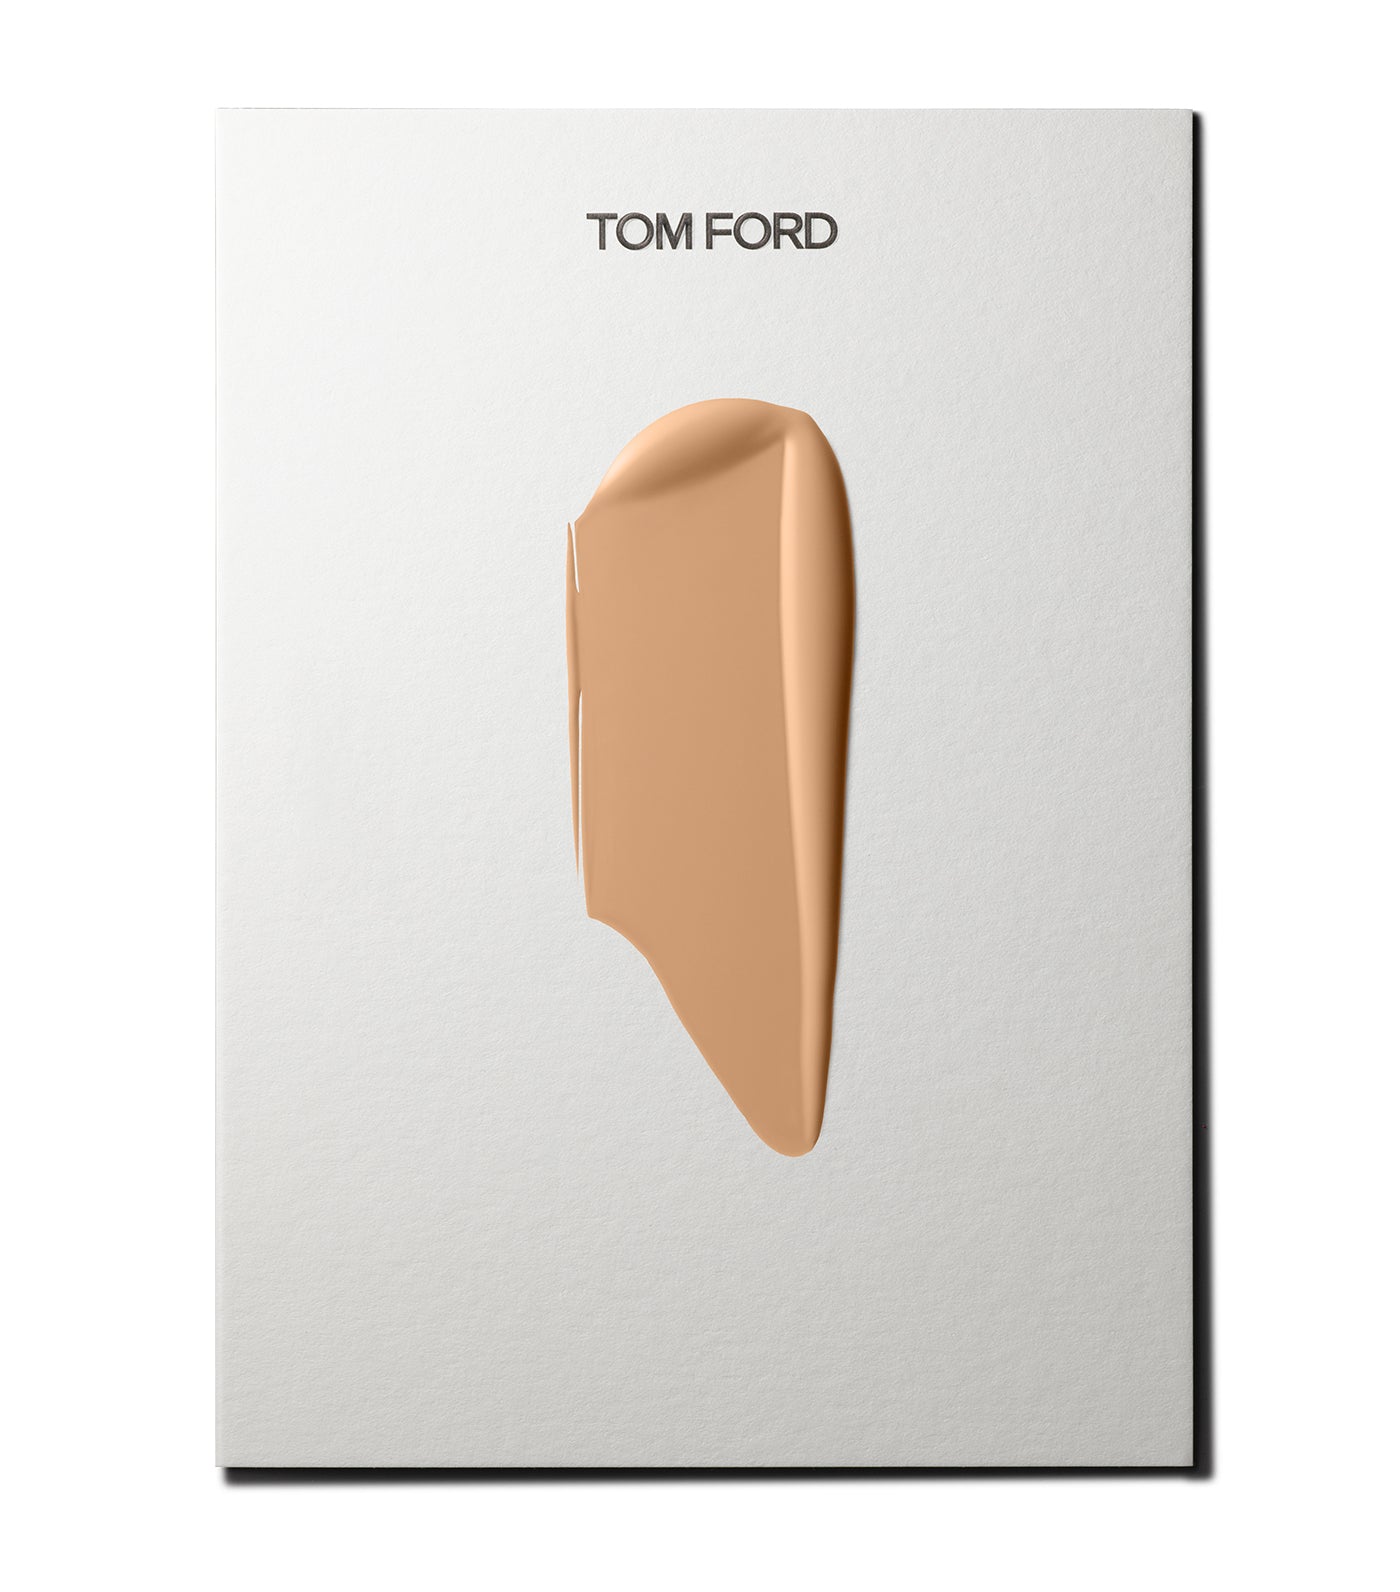 tom ford shade and illuminate soft radiance foundation spf 50/pa++++ fawn